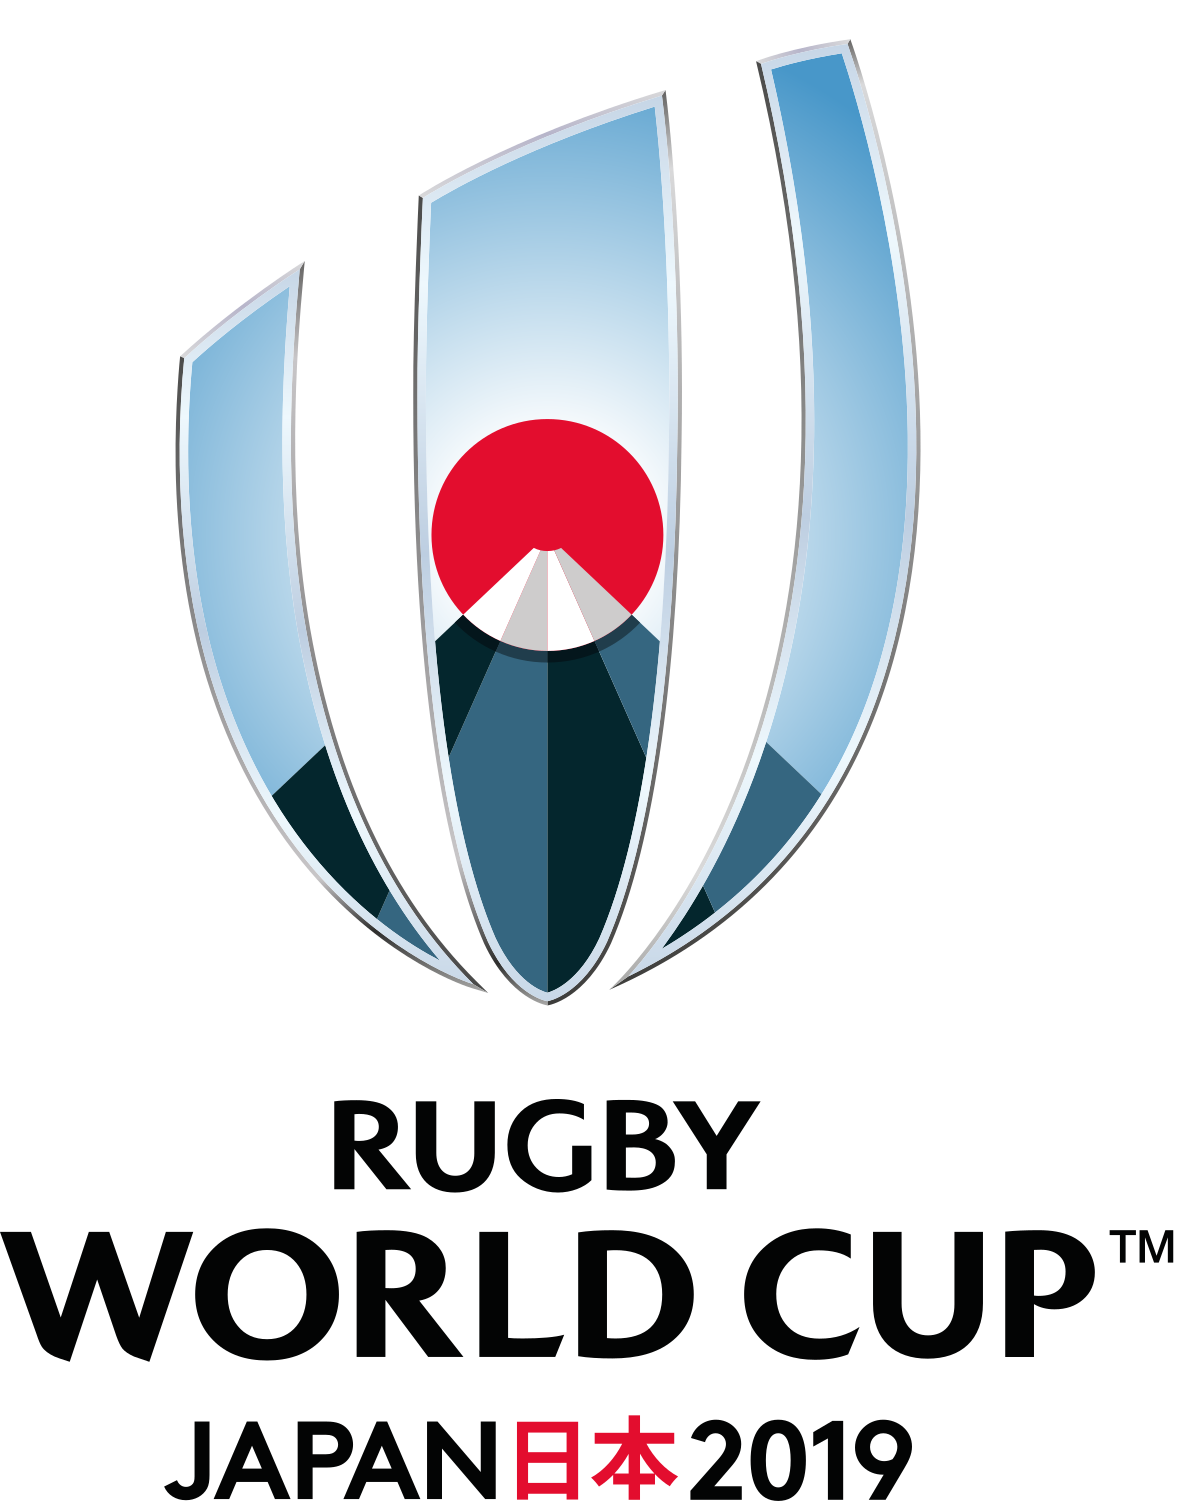 RWC 2019 All Matches Replay